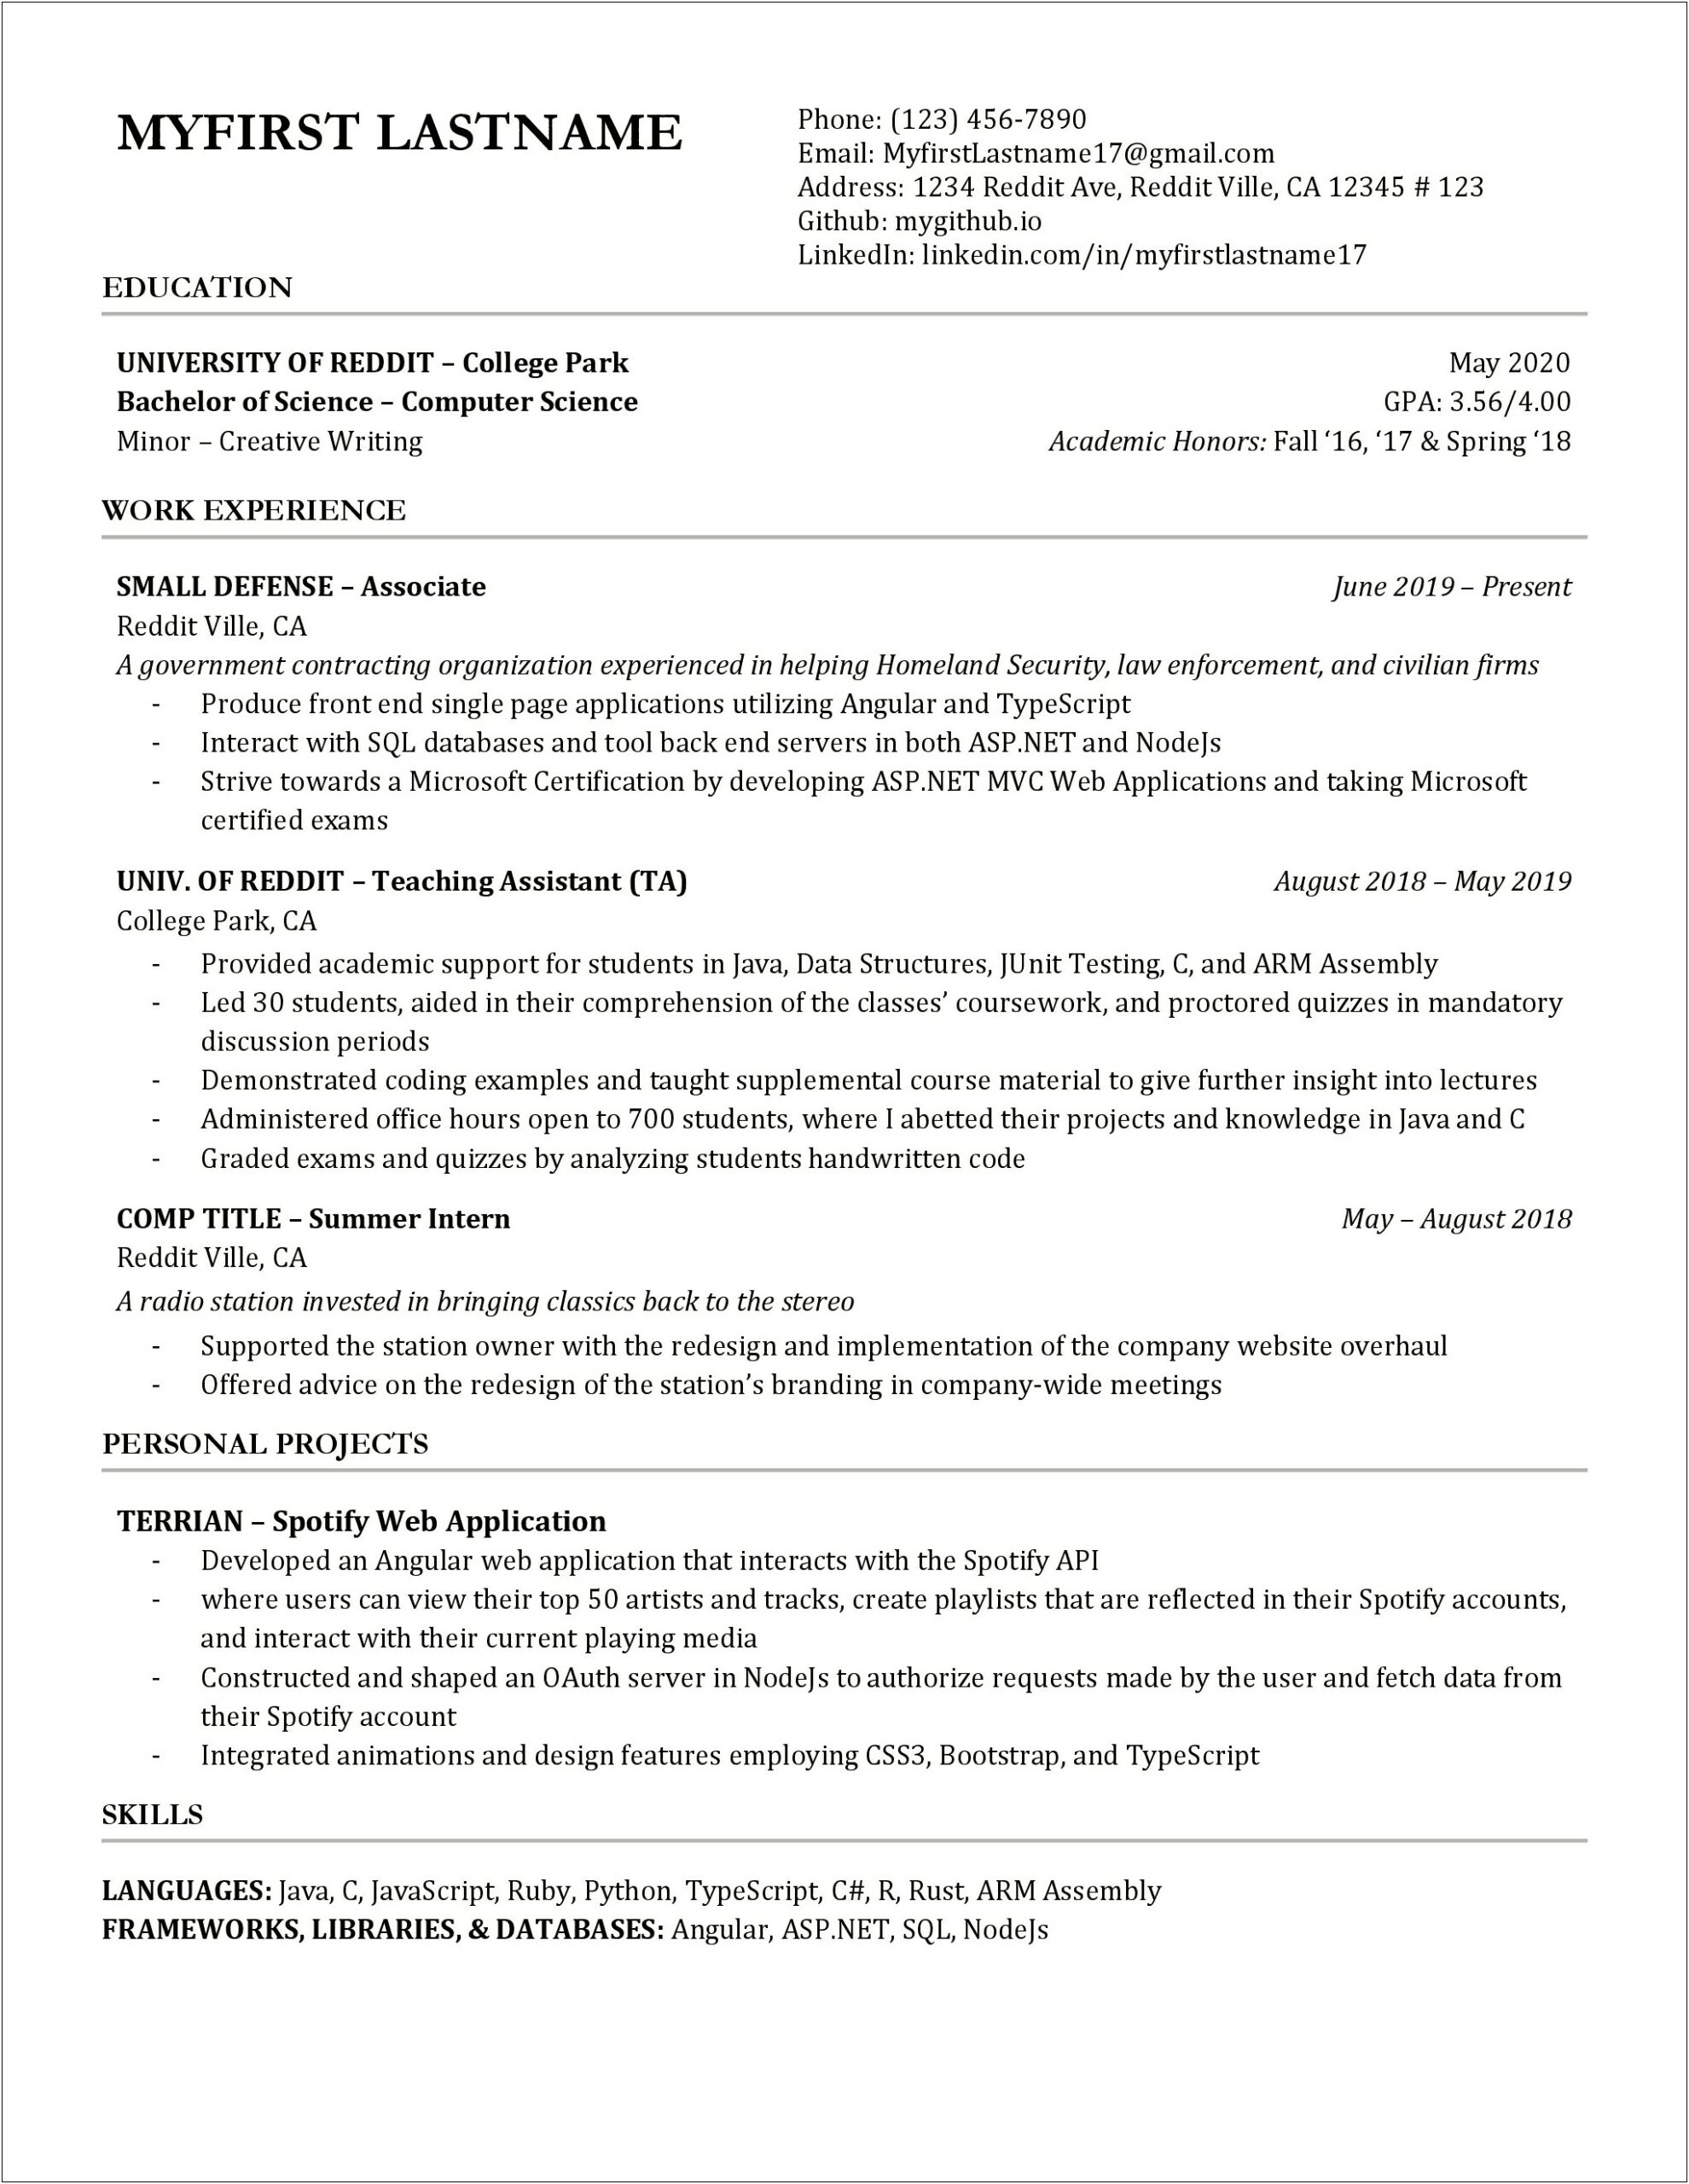 Lying About Job Title On Resume Reddit